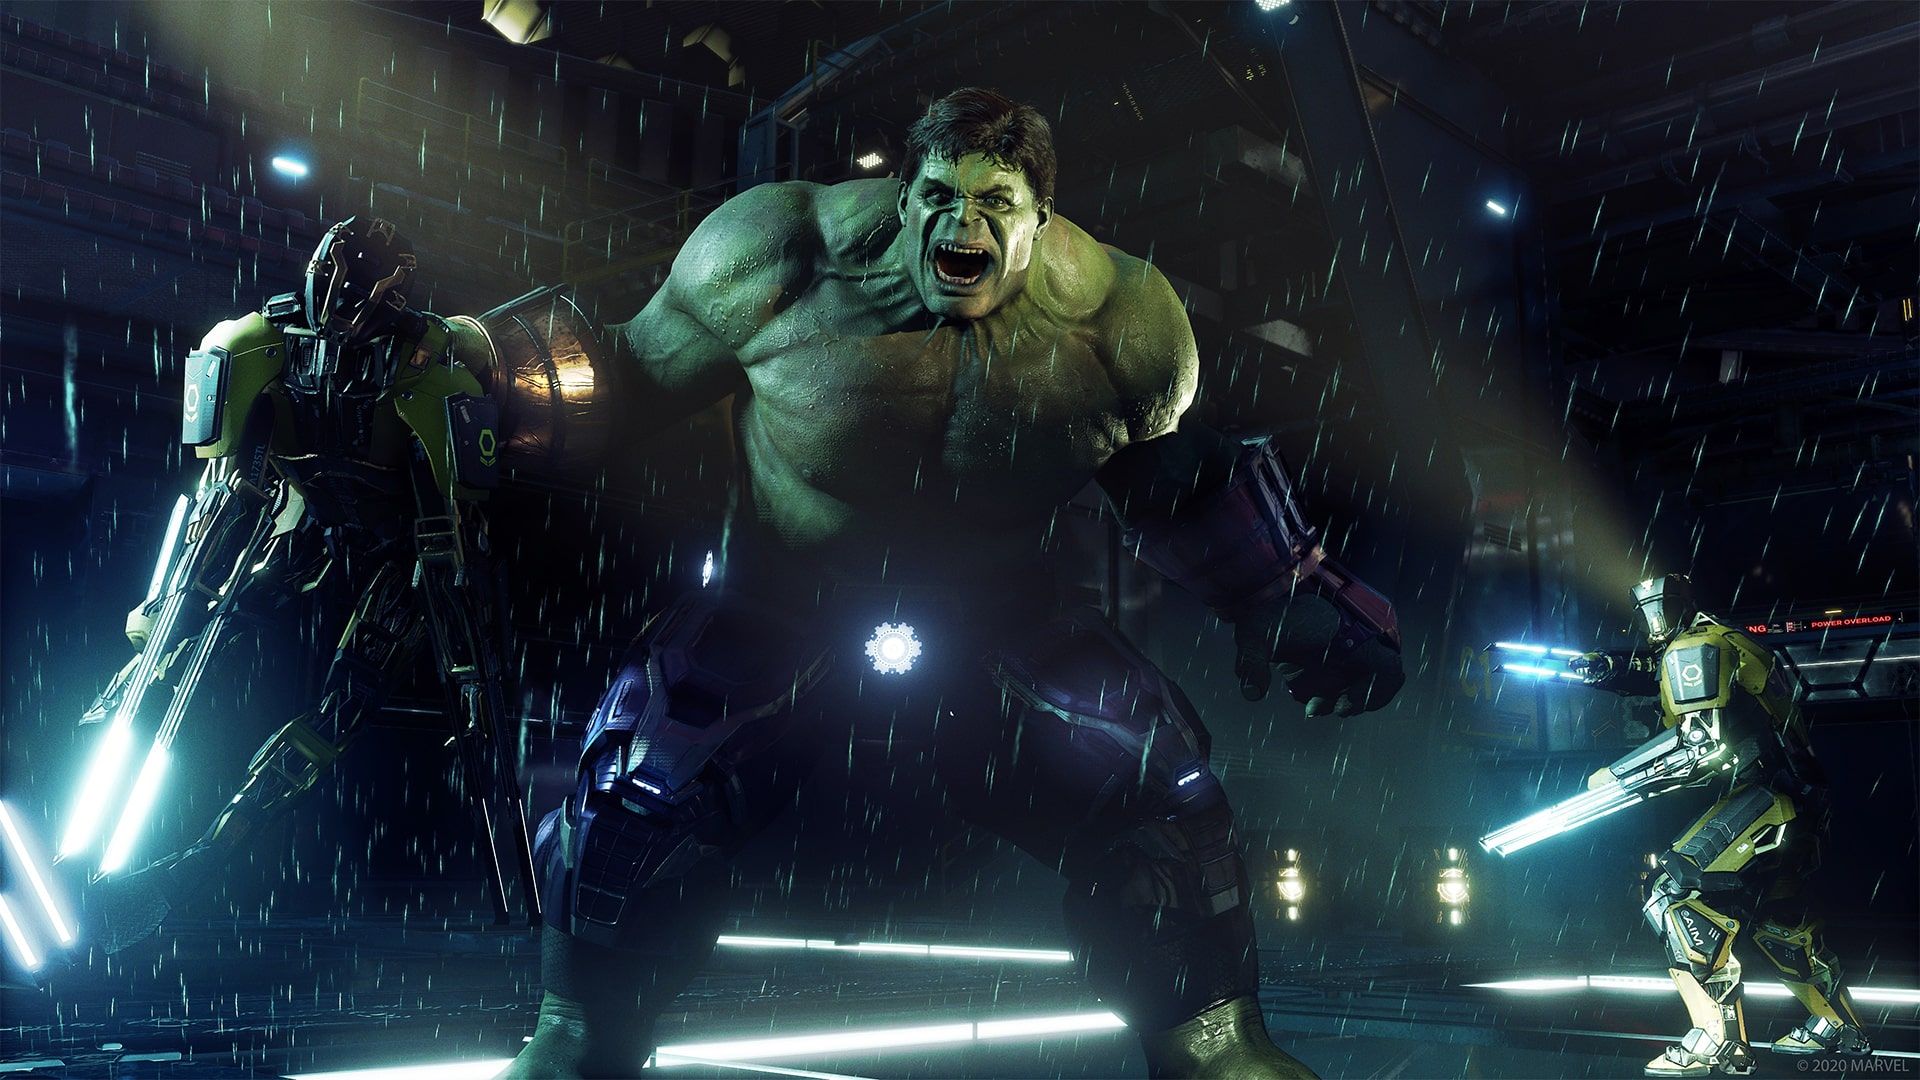 Hulk's Redemption in Marvel's Avengers Is a Story We Need Right Now